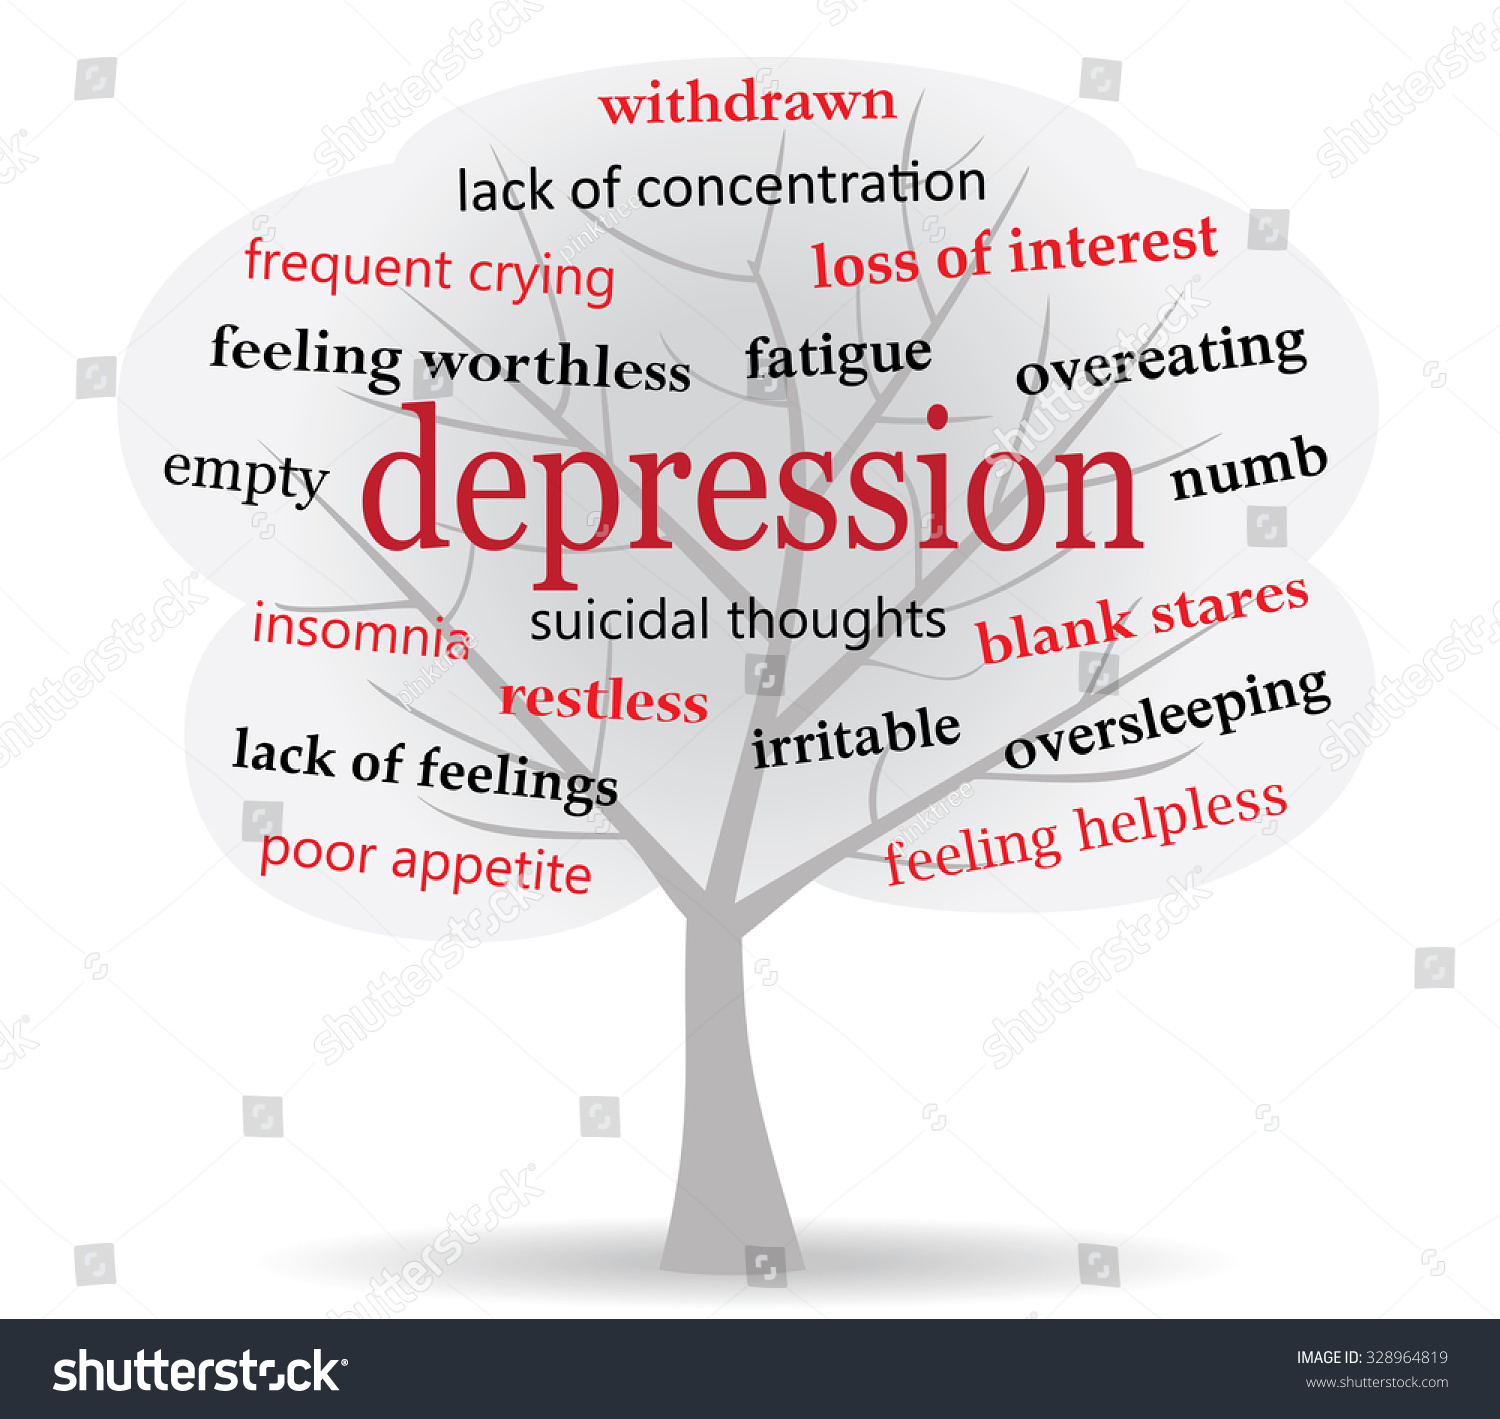 symptoms-of-depression- Stock-vector-tree-filled-with-dark-cloud-shape-and-words-connected-to-symptoms-of-depression-328964819